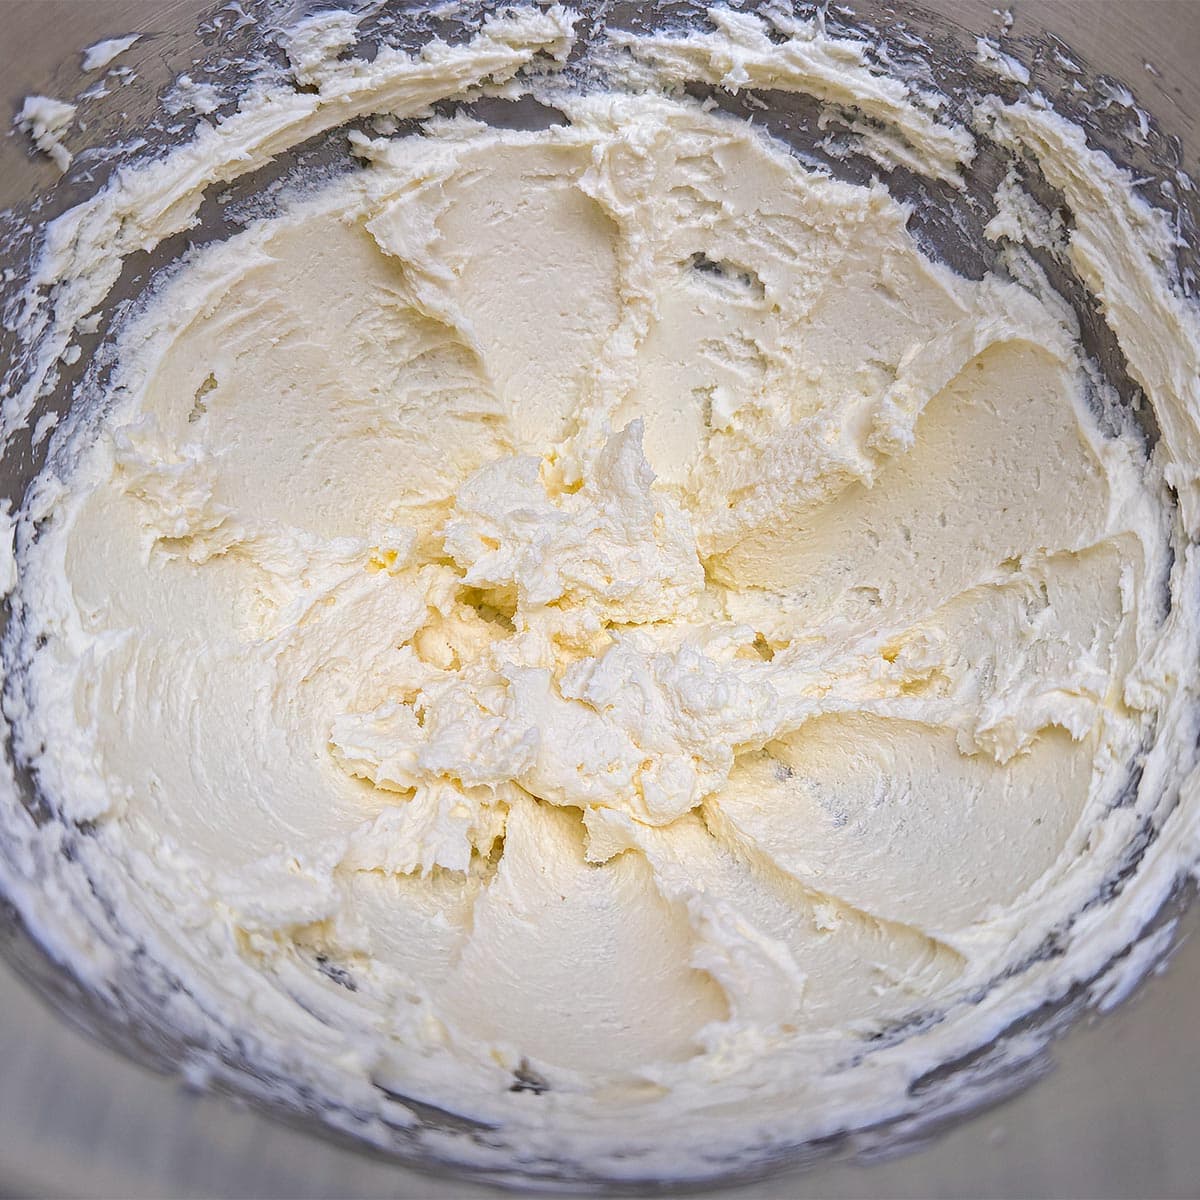 Creaming the butter and cream cheese together in a mixer.